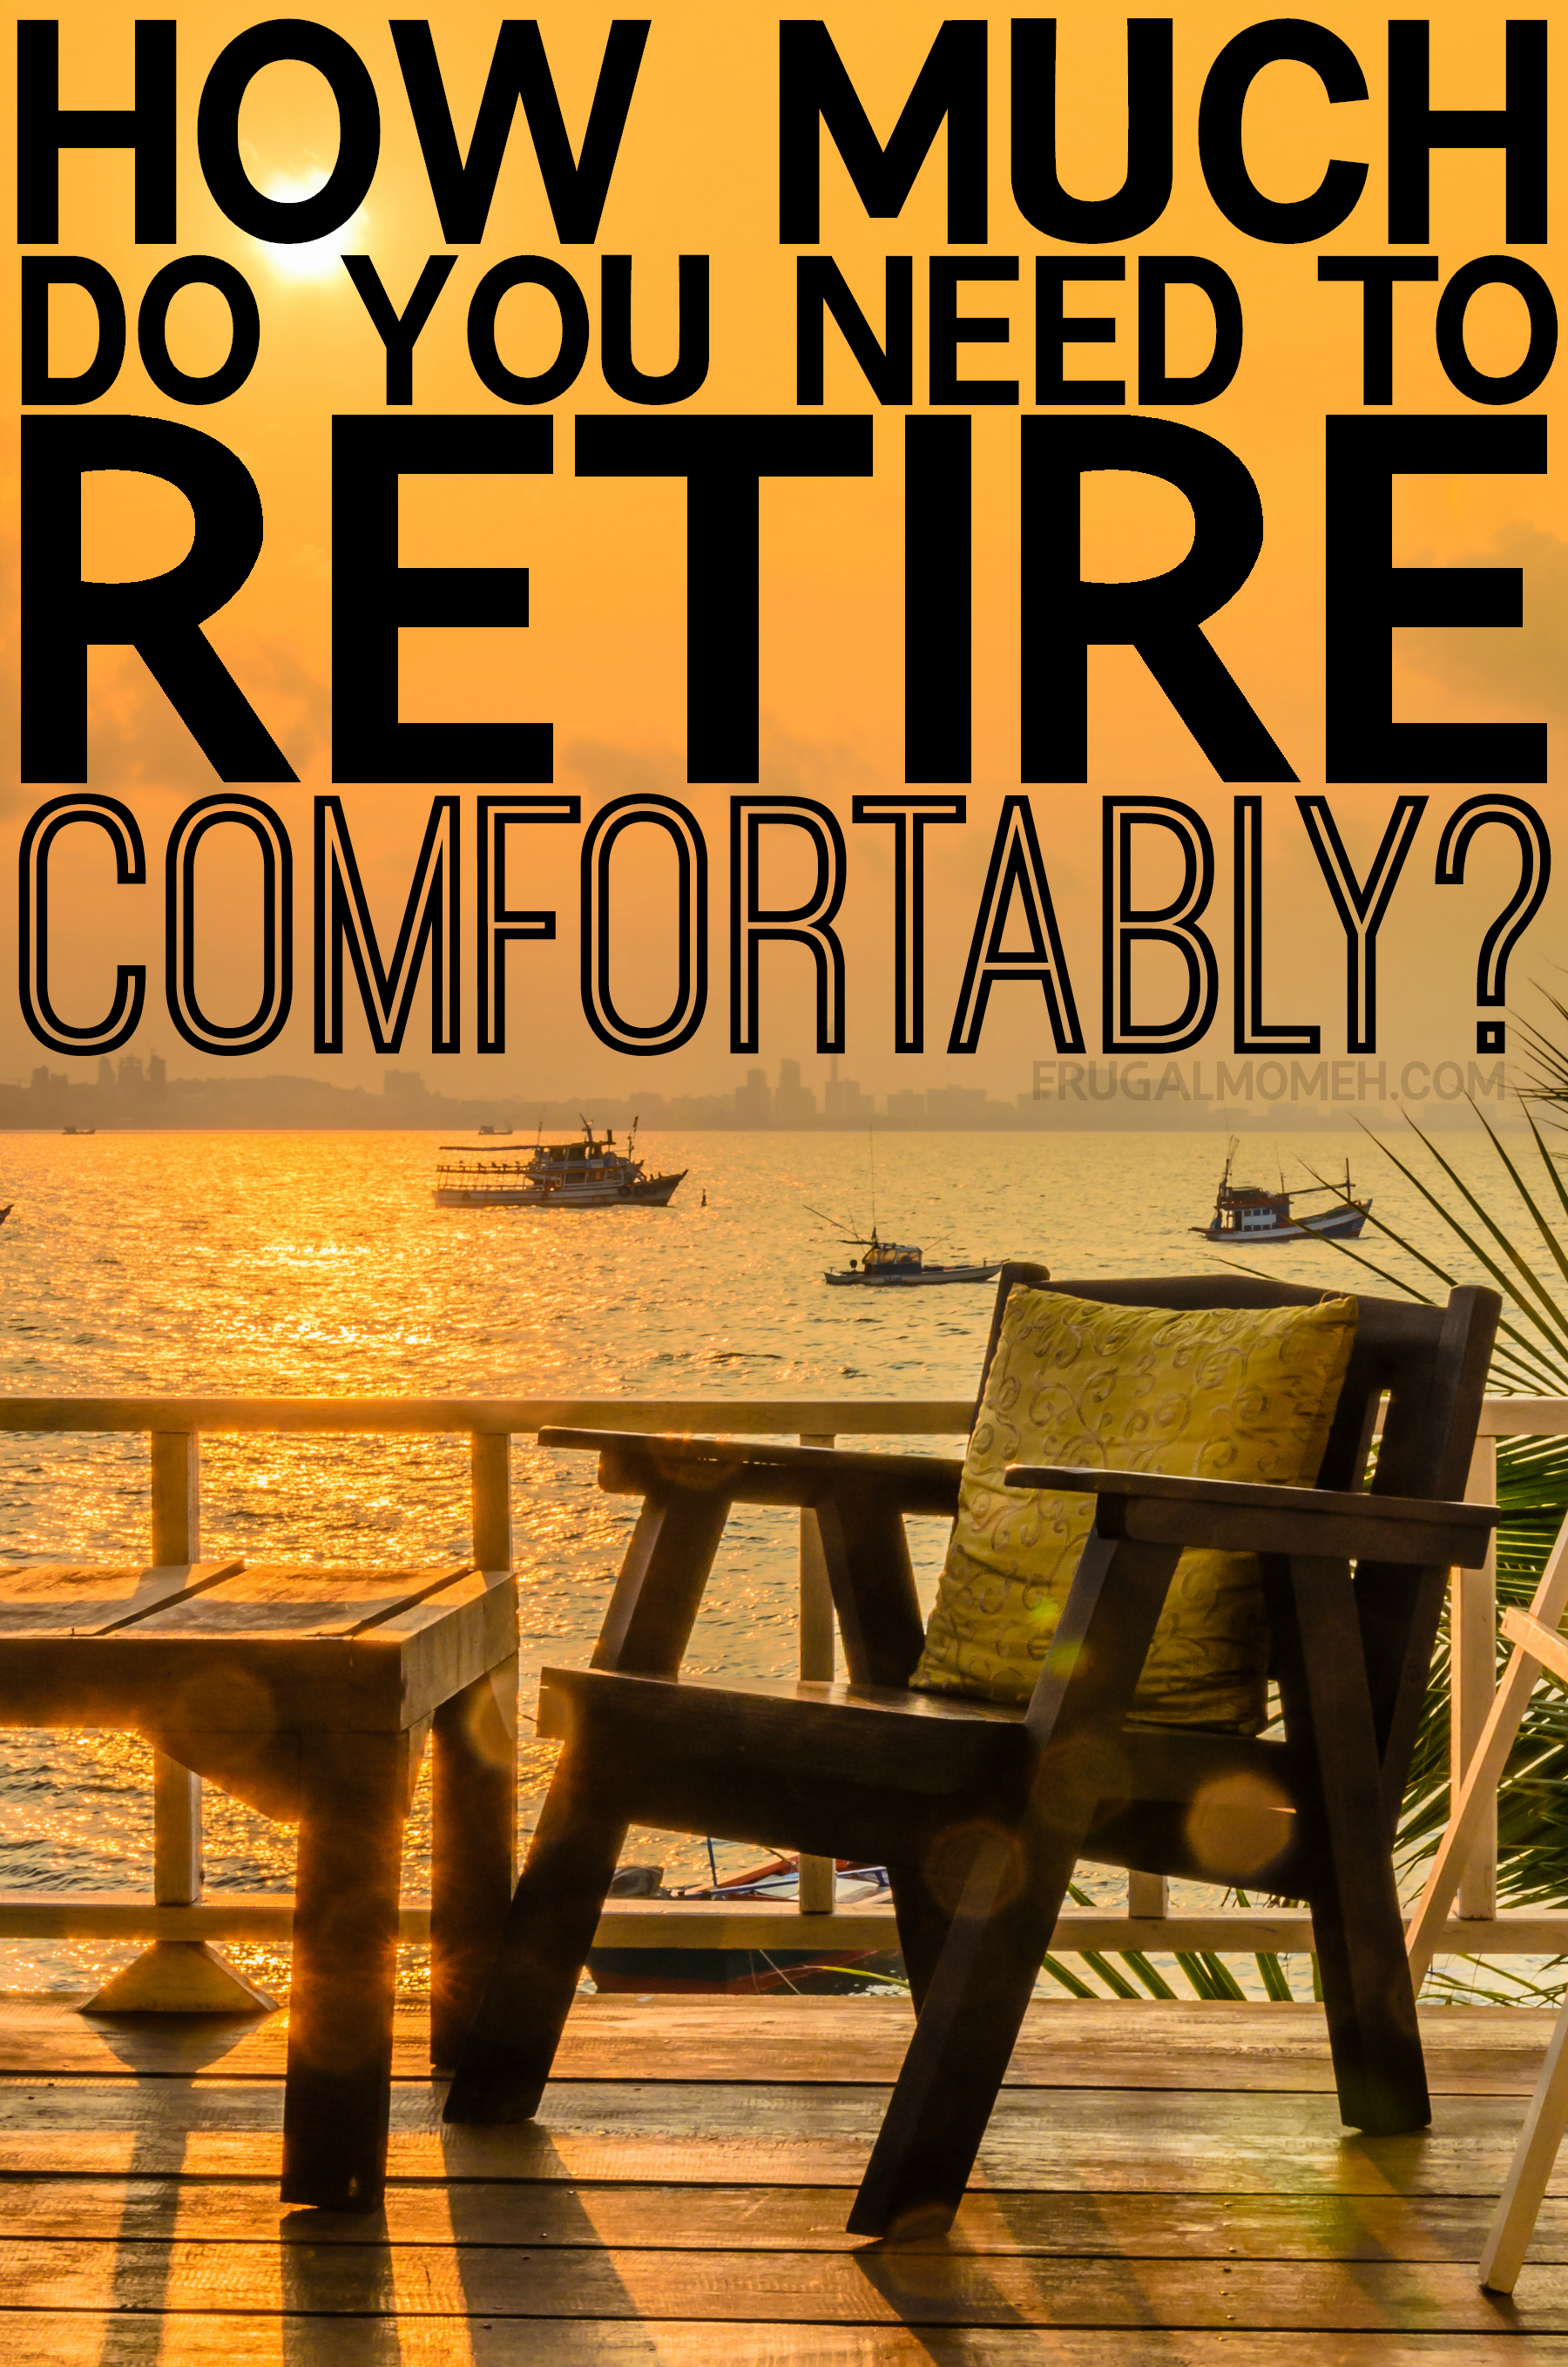 How Much Do You Need to Retire Comfortably? Finance tips for a great retirement. Financial planning can be easy when done right!